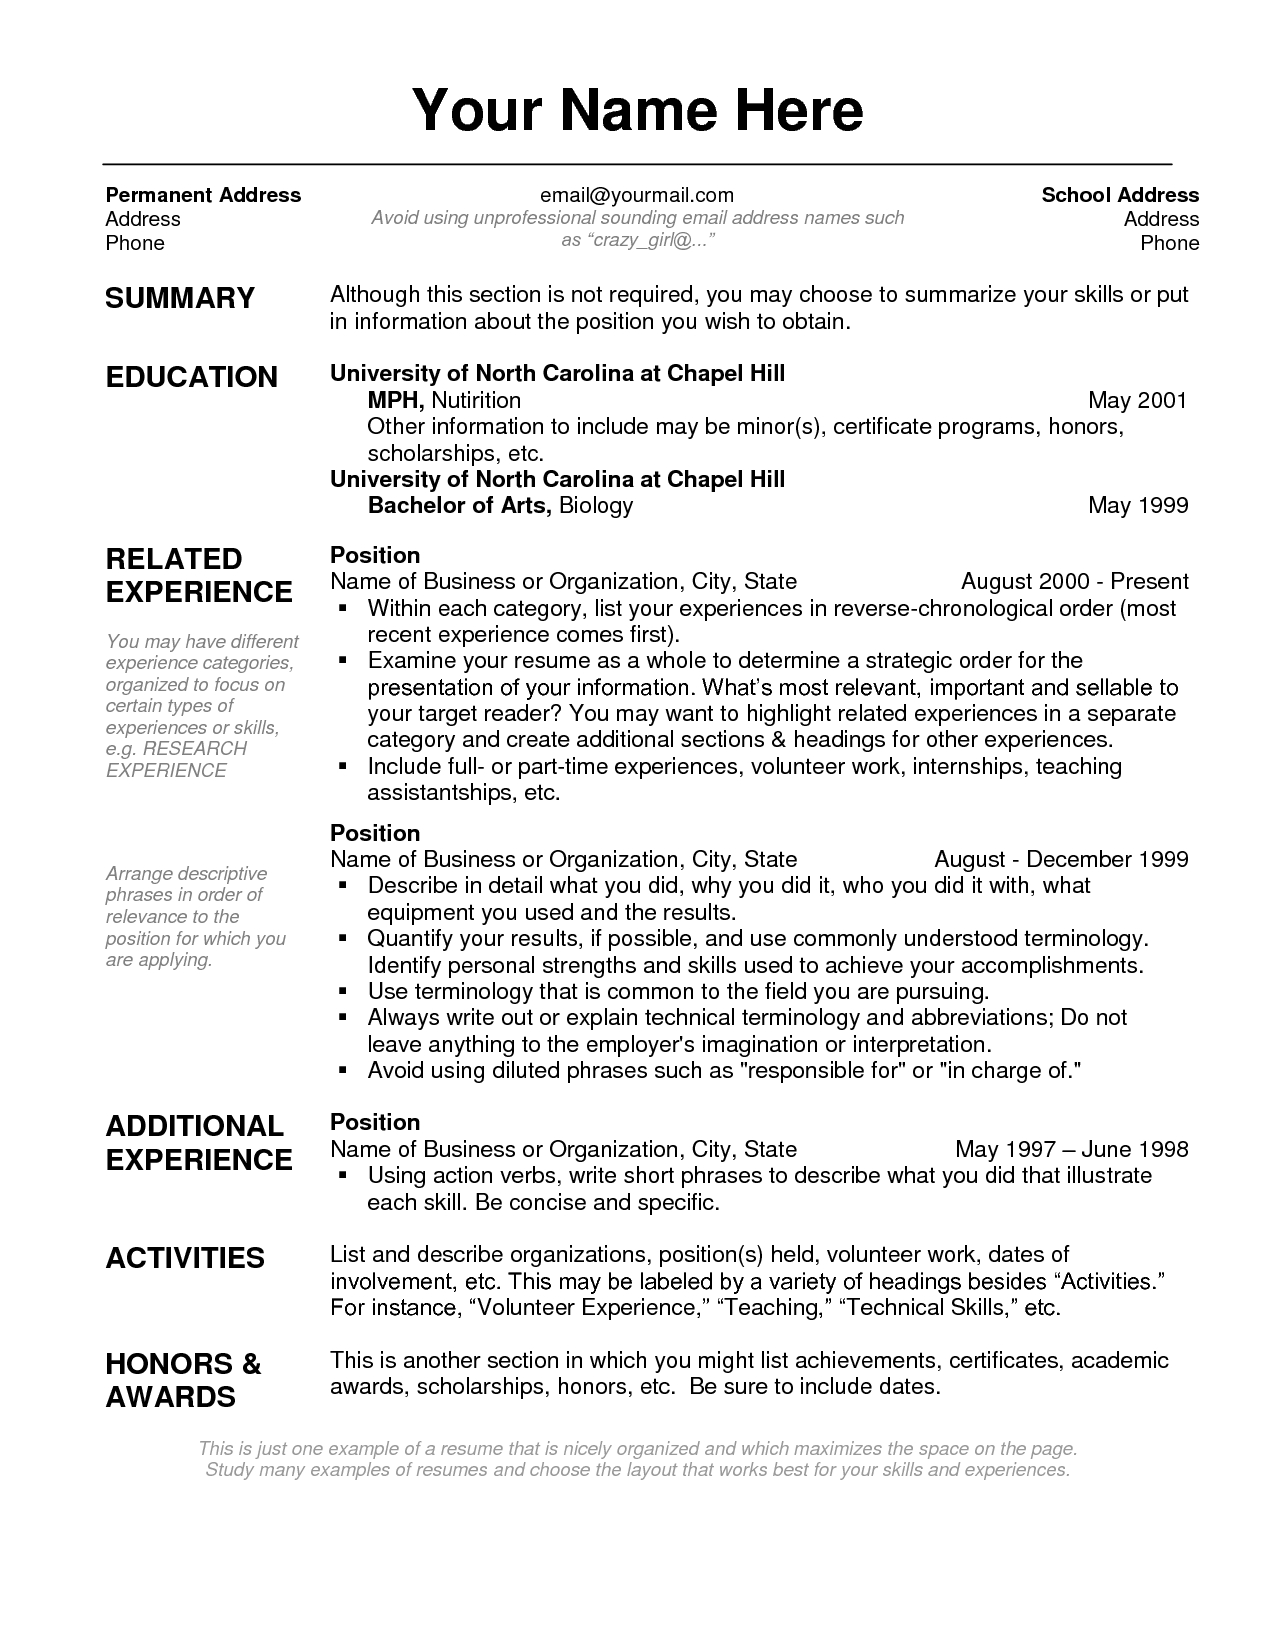 Experience name. Short Resume example. Resume for applying. Honors в резюме. Position applied в резюме.